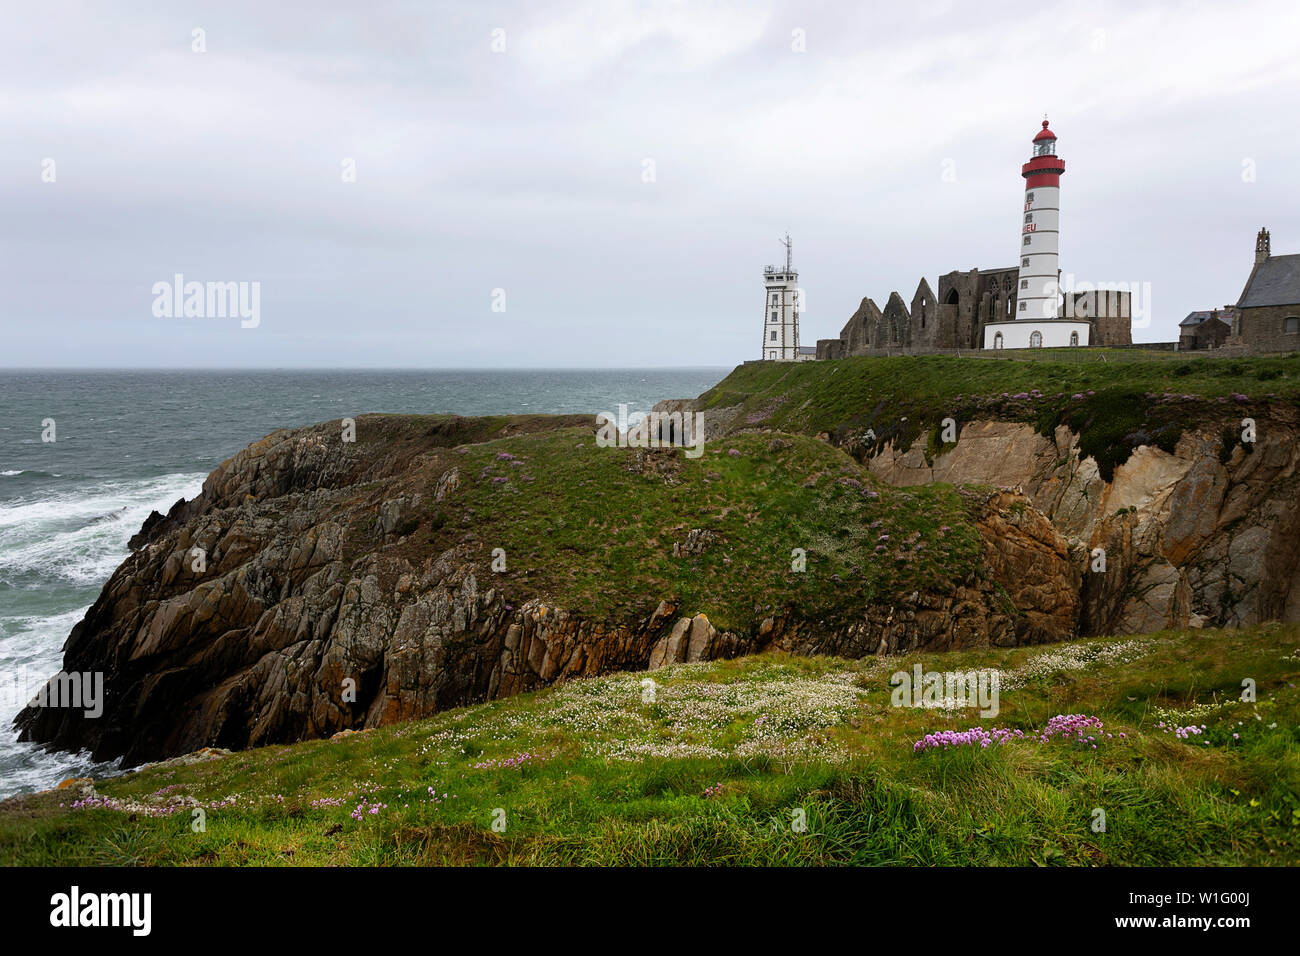 The lighthouse and abbey rise above the sea and rocky coastline at Pointe Saint-Mathieu in Brittany, France Stock Photo